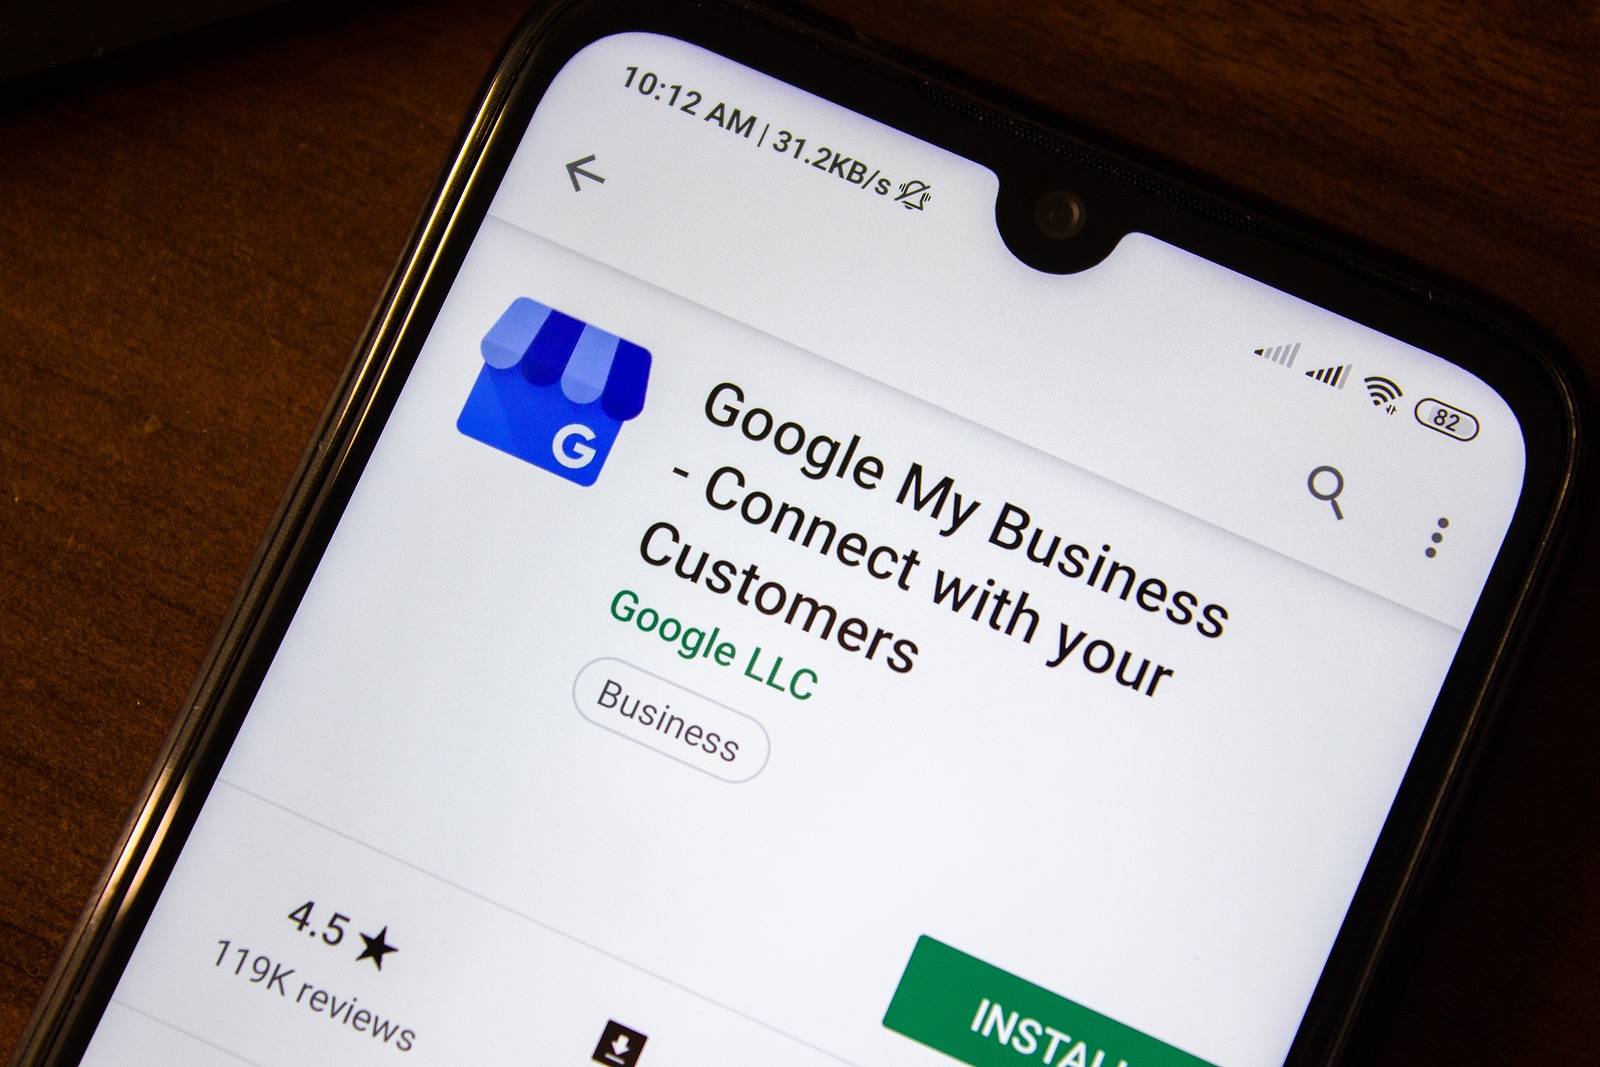 Google My Business on phone screen. This is just one example of SEO tools that can boost your online presence. Learn more here.